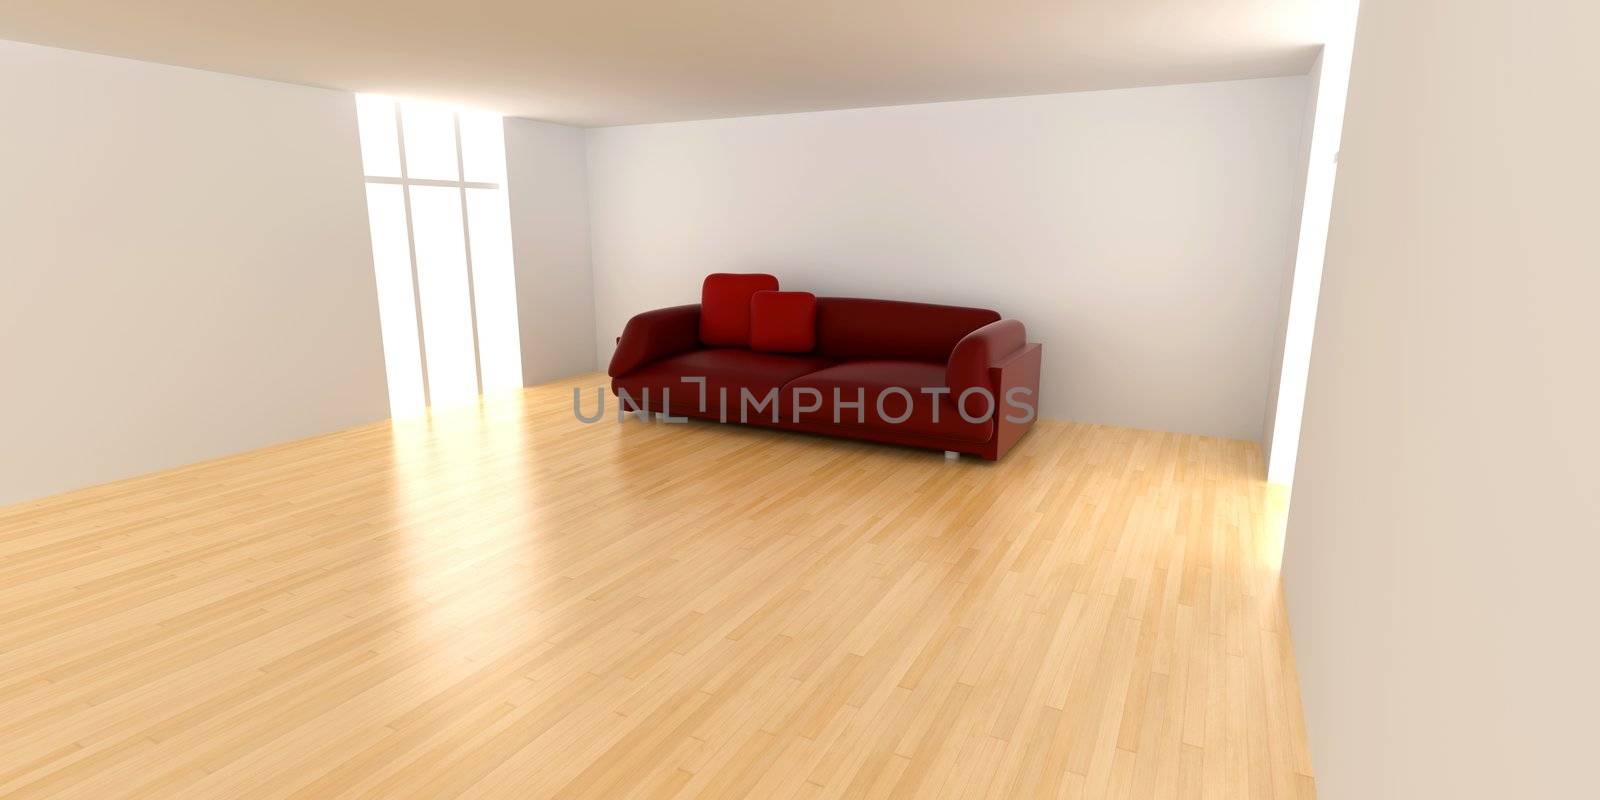 Red Sofa in an empty room by Spectral